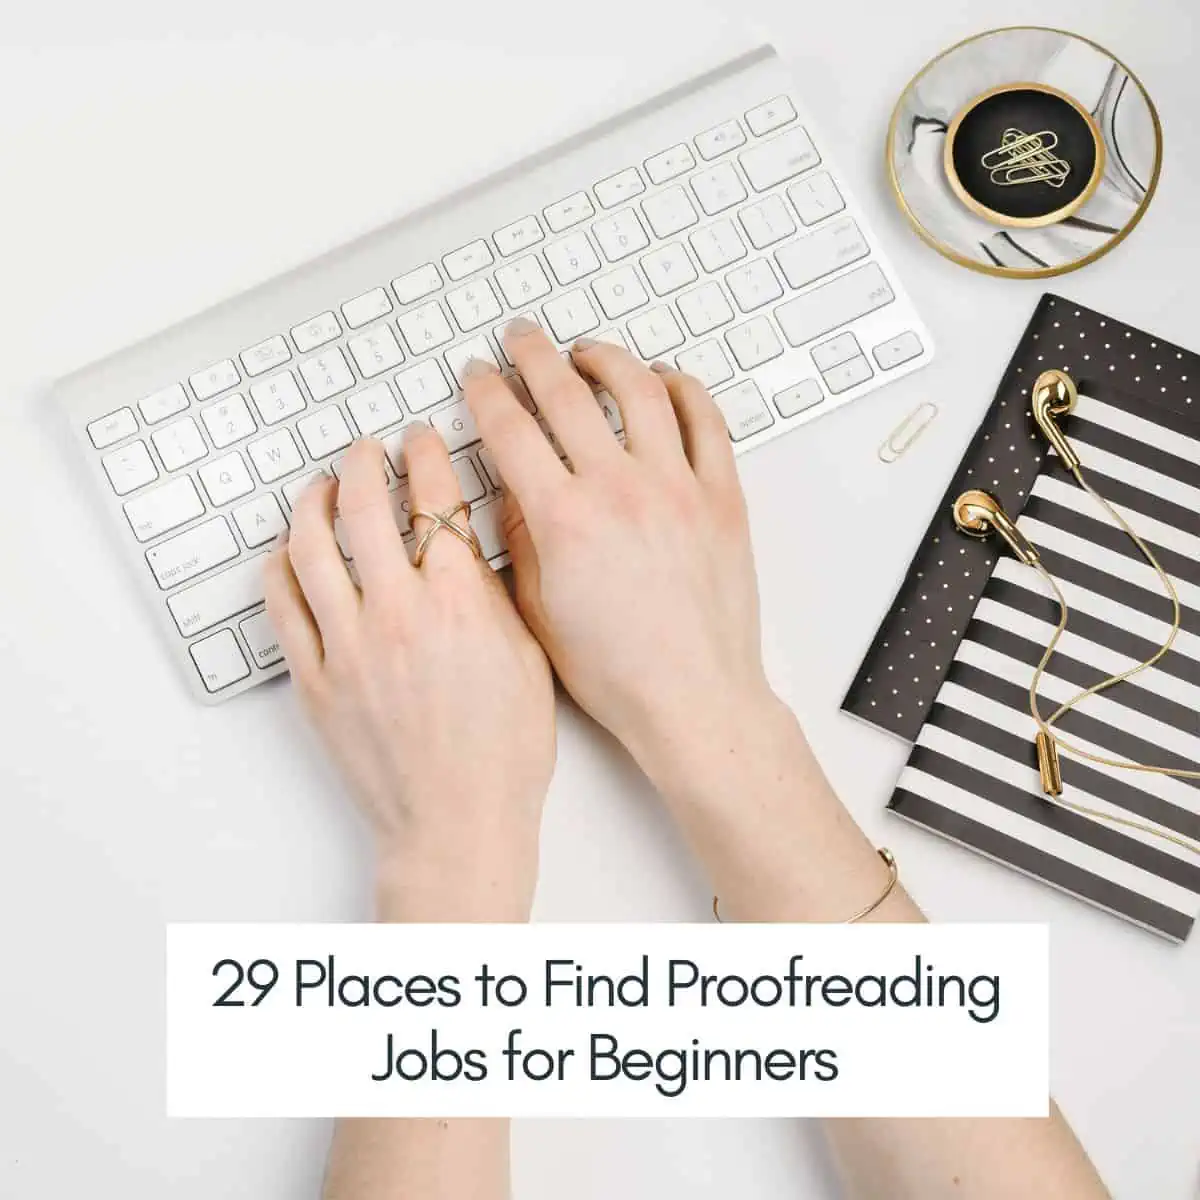 online proofreading jobs for beginners